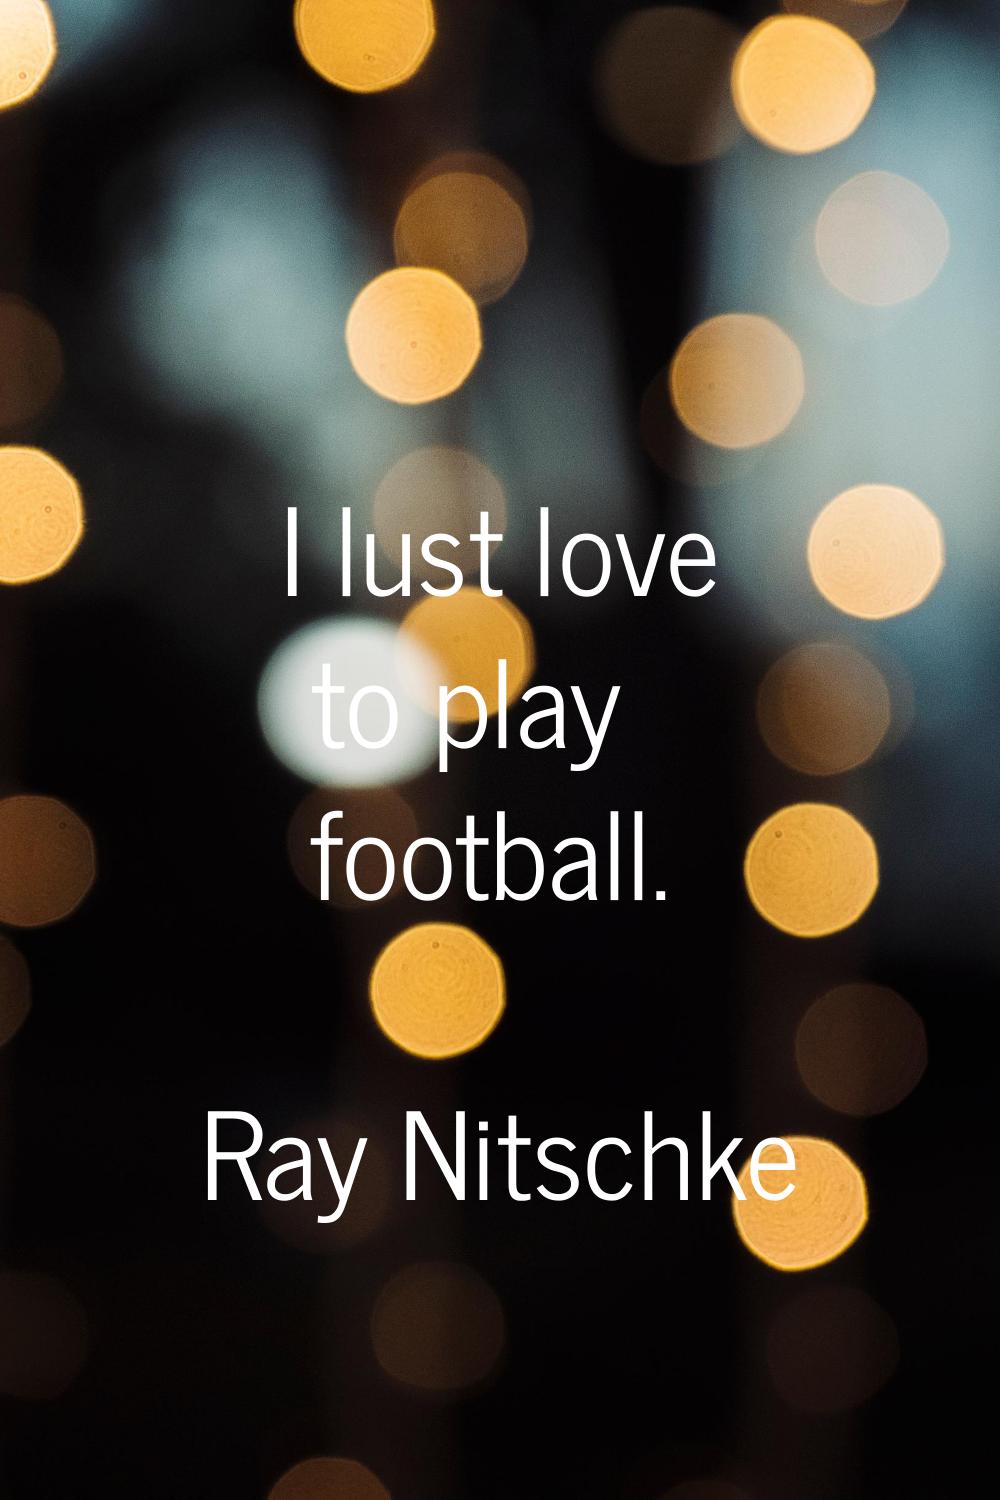 I lust love to play football.